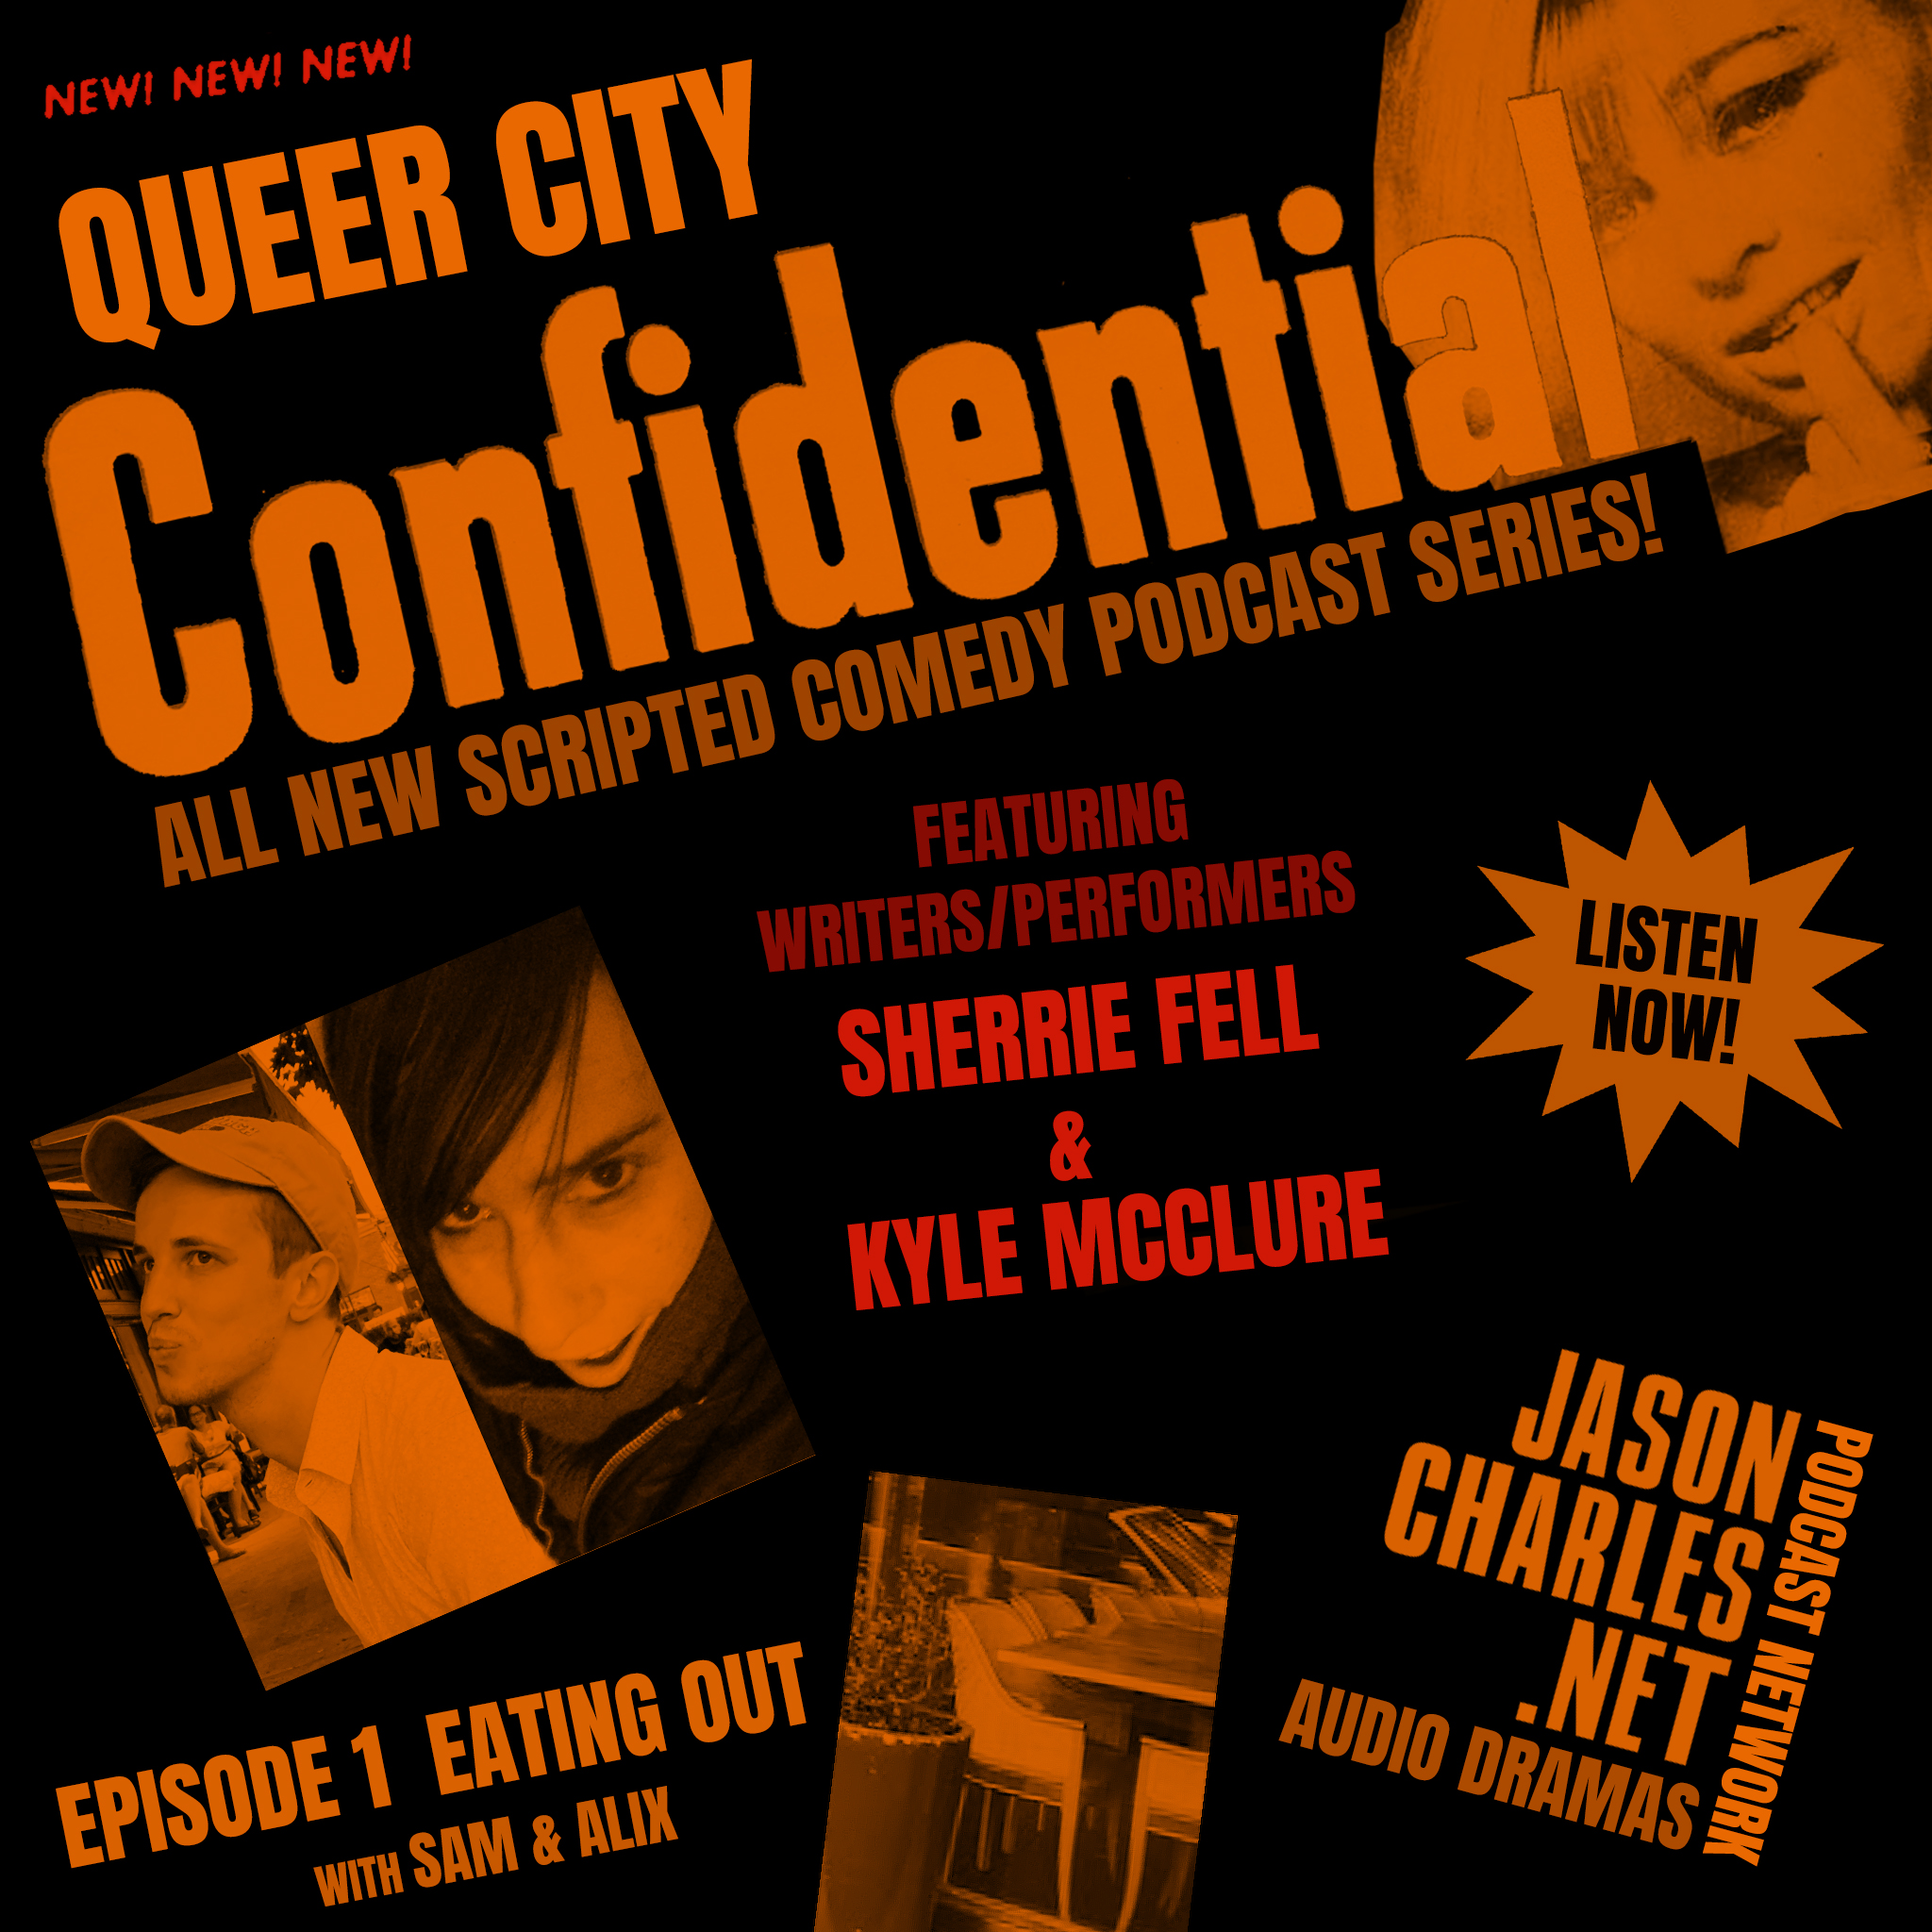 QUEER CITY CONFIDENTIAL Episode 1 Eating Out with Sam and Alix